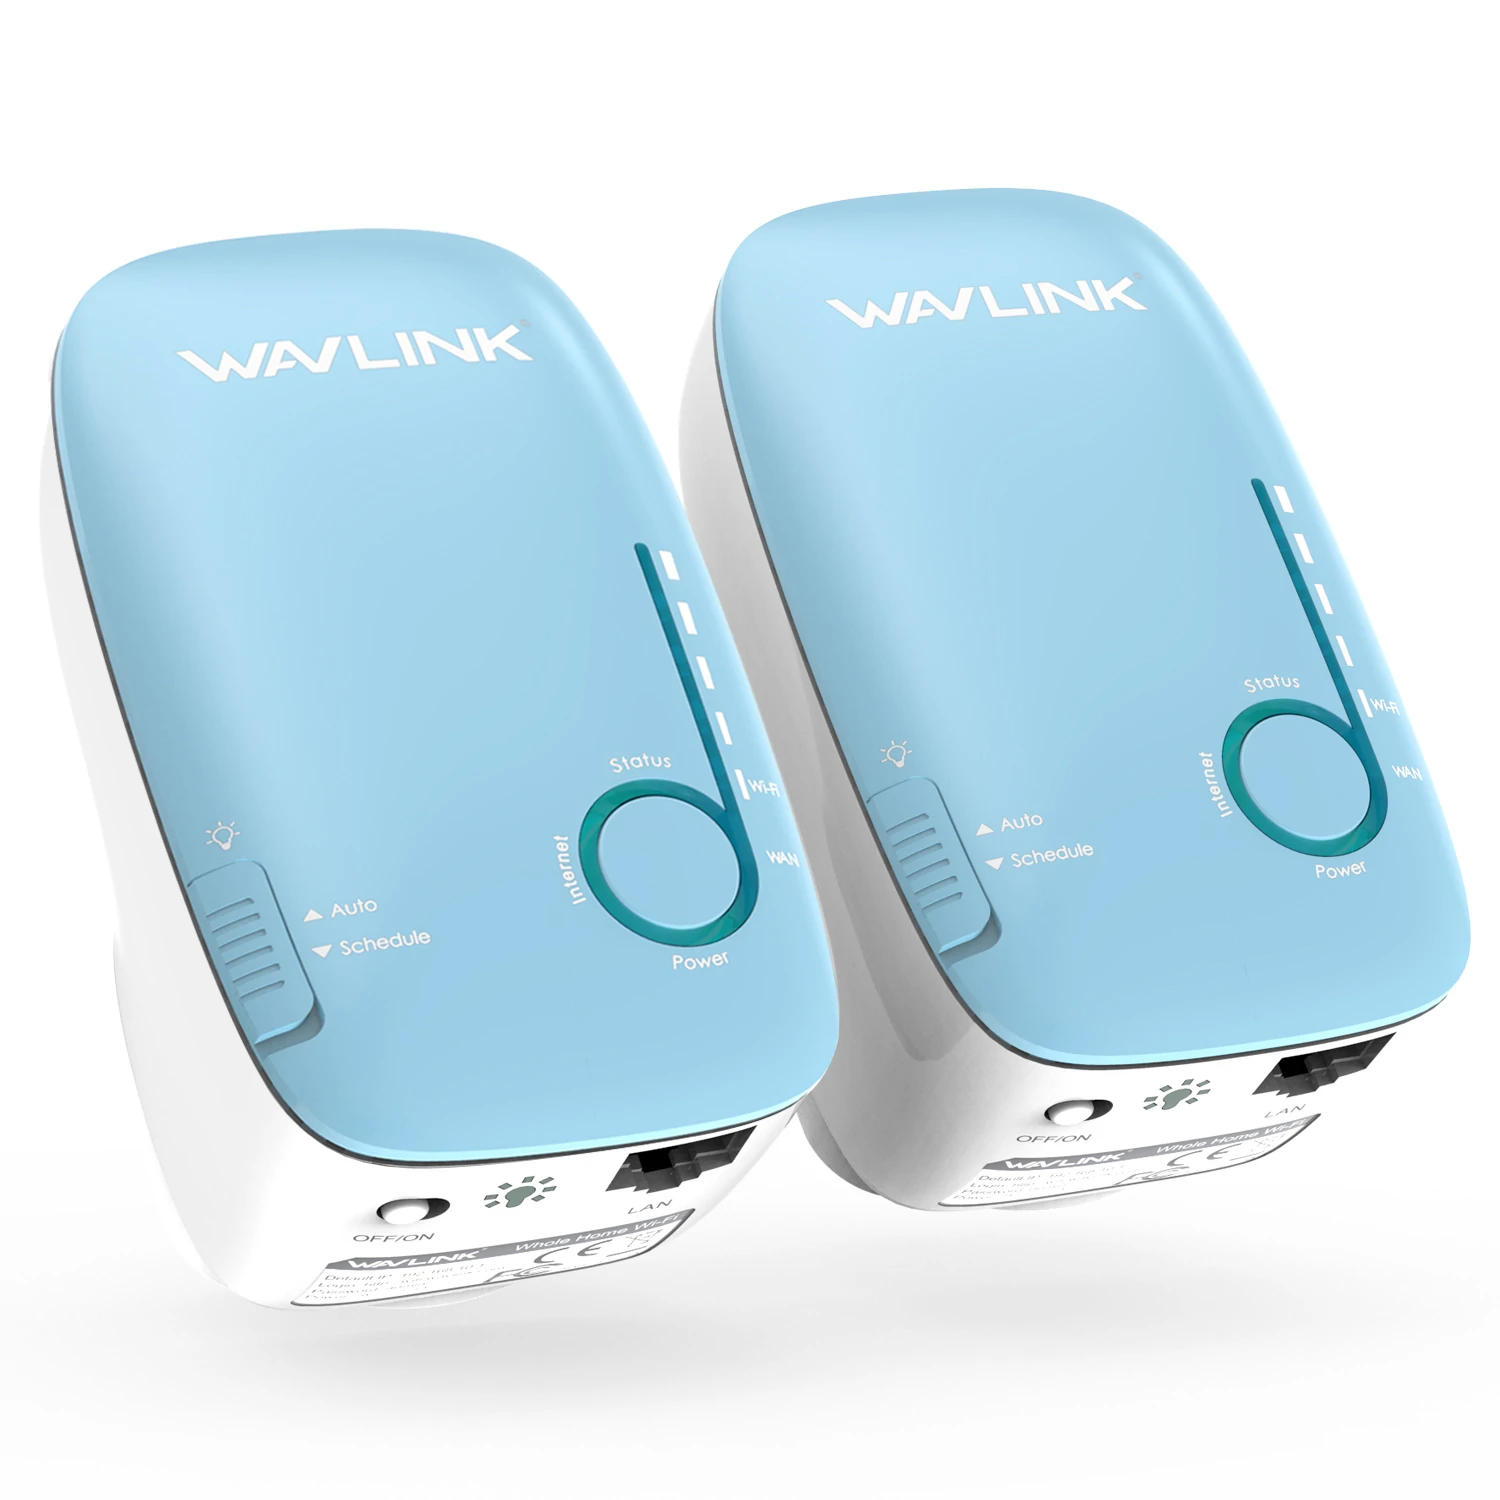 Find Wavlink WL WN576K2 Wifi Router Dual Band Network Router 1200M WiFi Mesh Networking 2 Pack AC1200 Hal Glow Whole Home Wall Plug for Sale on Gipsybee.com